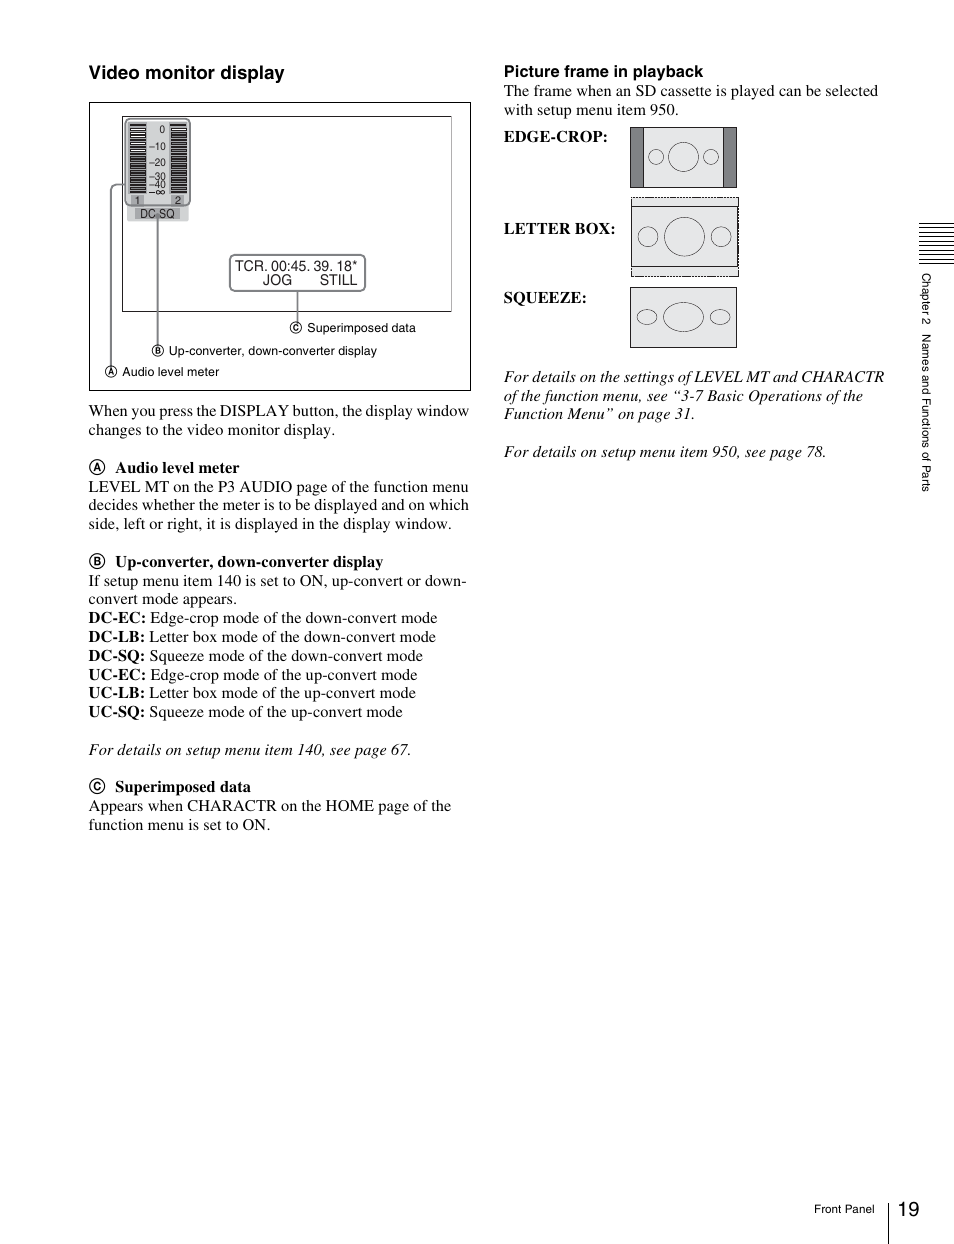 Video monitor display | Sony HDW-S280 User Manual | Page 19 / 94